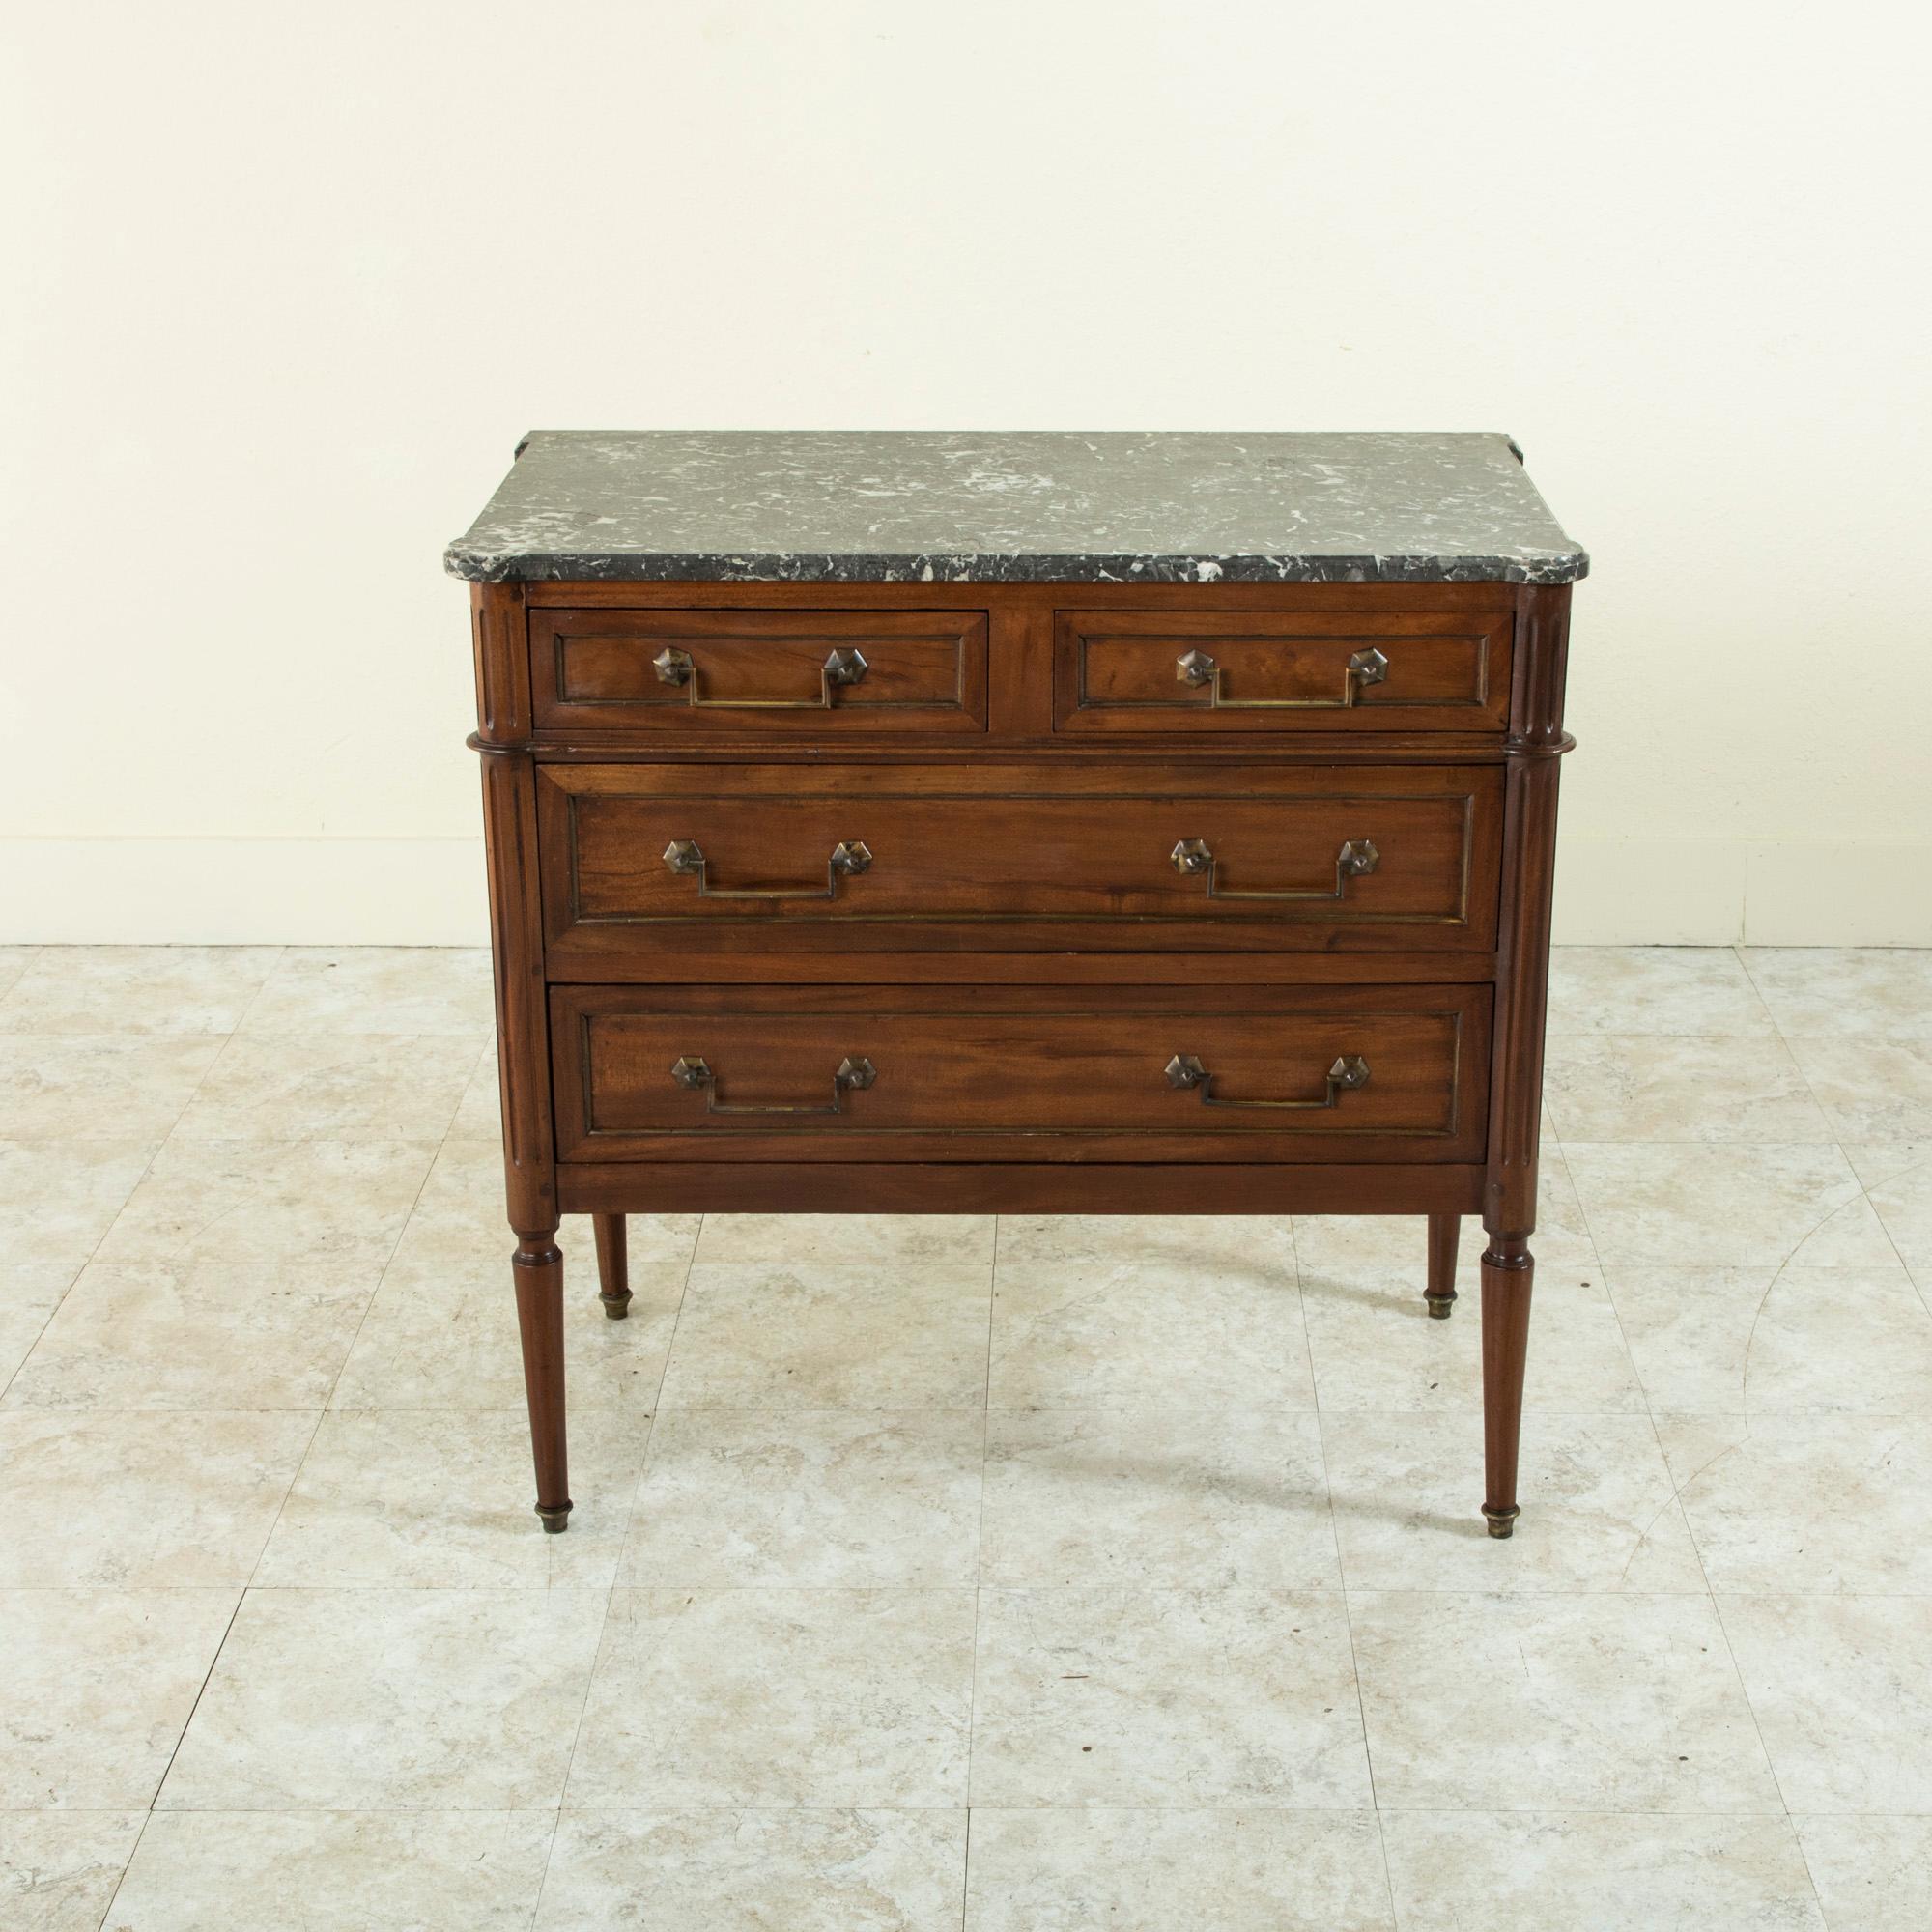 Measuring only 35 inches wide, this small scale mid-nineteenth century French Louis XVI mahogany commode or chest of drawers features a beveled Saint Anne marble top and fluted rounded corners. Its four drawers of dovetail construction are detailed